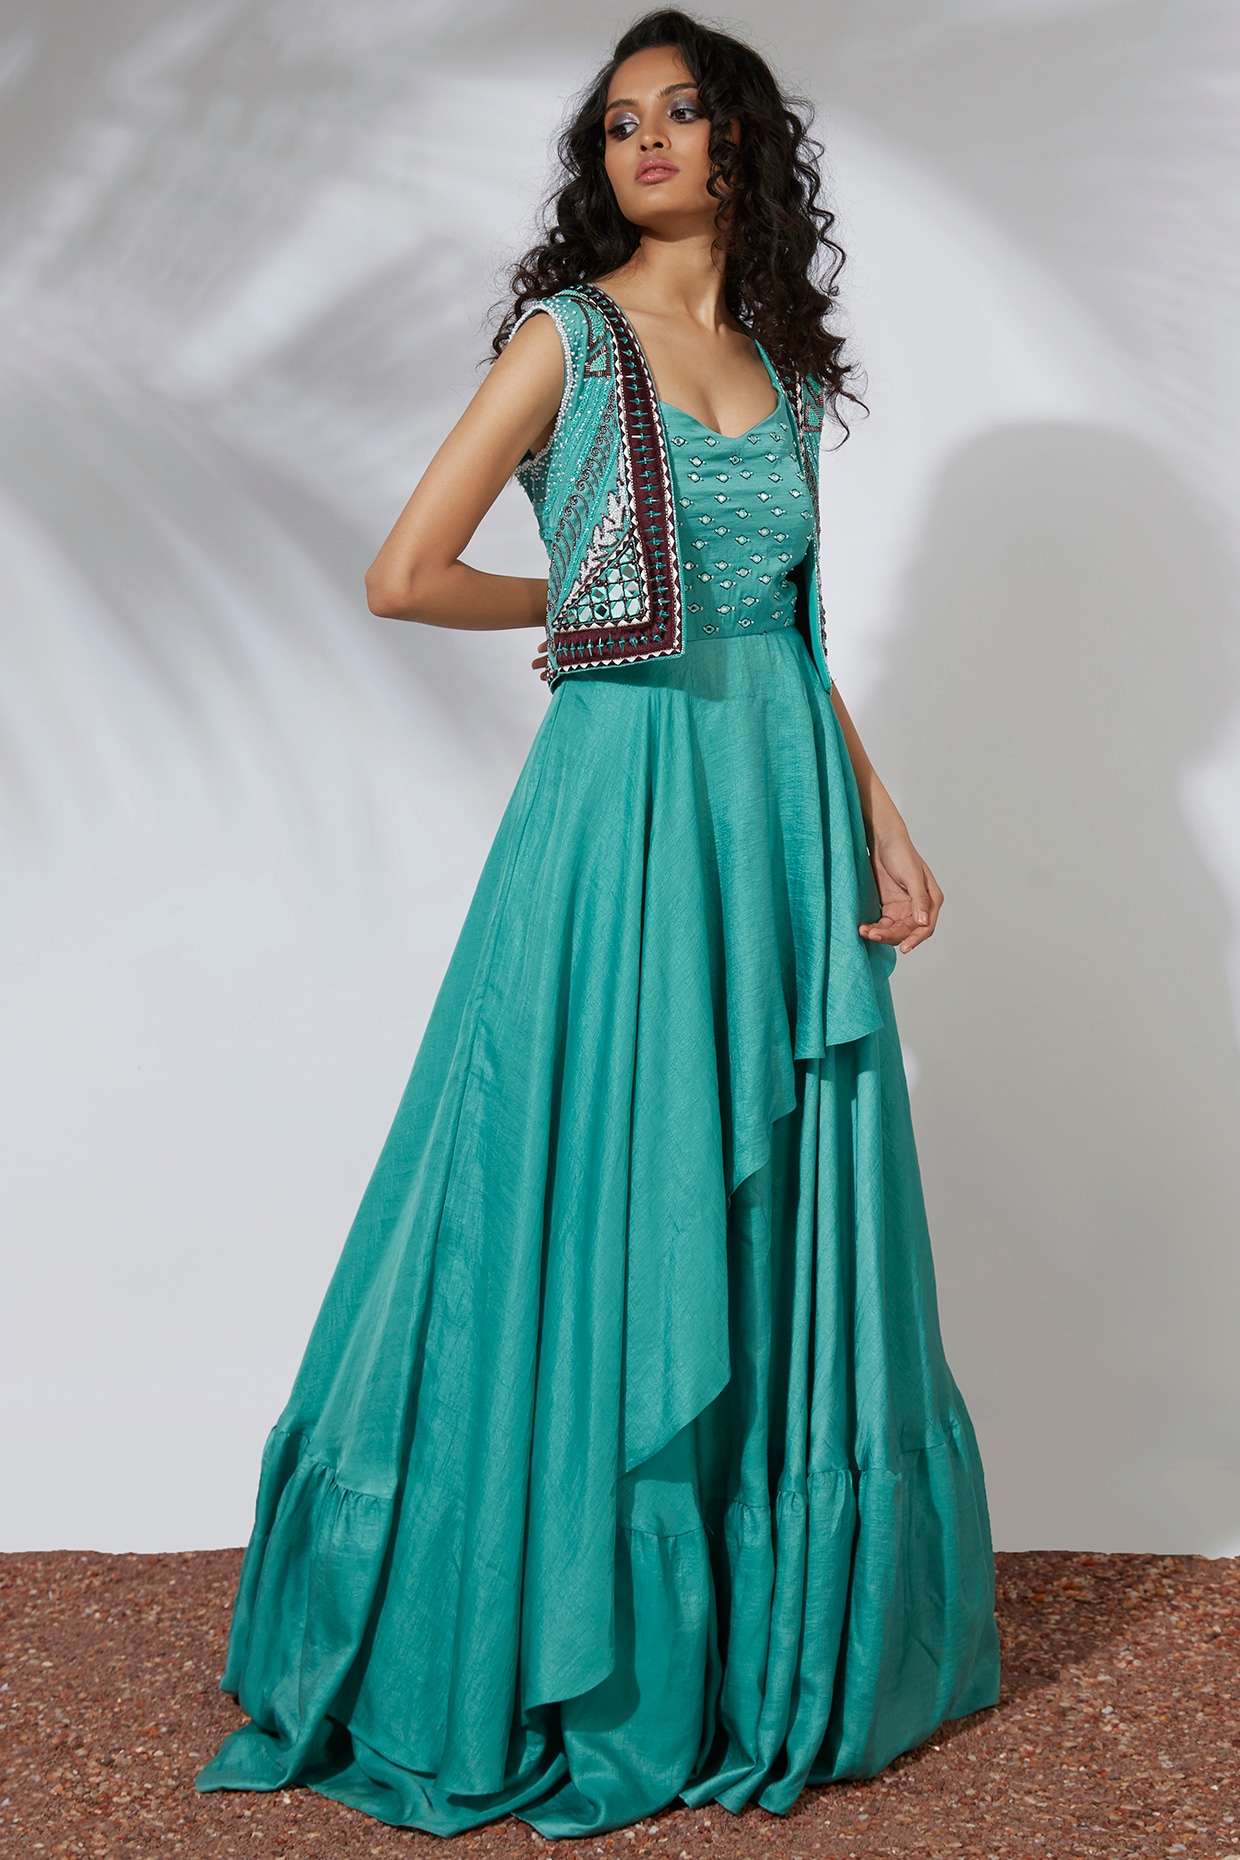 party gowns, wedding gowns, designer gowns, Indo-western gowns, and  floor-length gowns Gowns for women